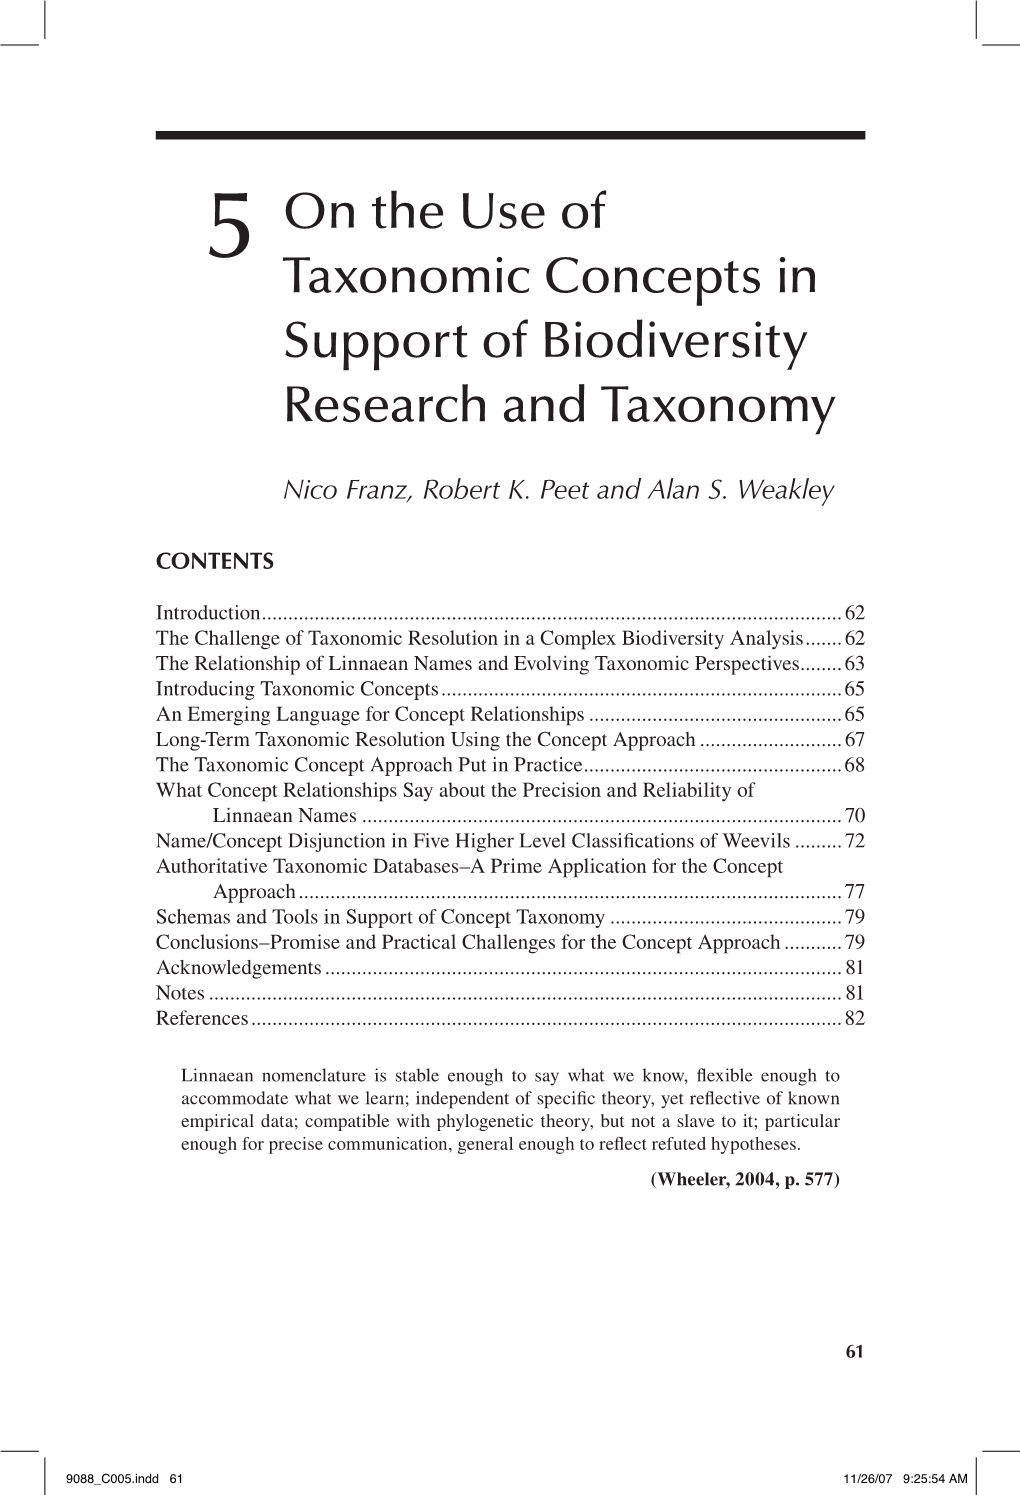 On the Use of Taxonomic Concepts in Support of Biodiversity Research and Taxonomy